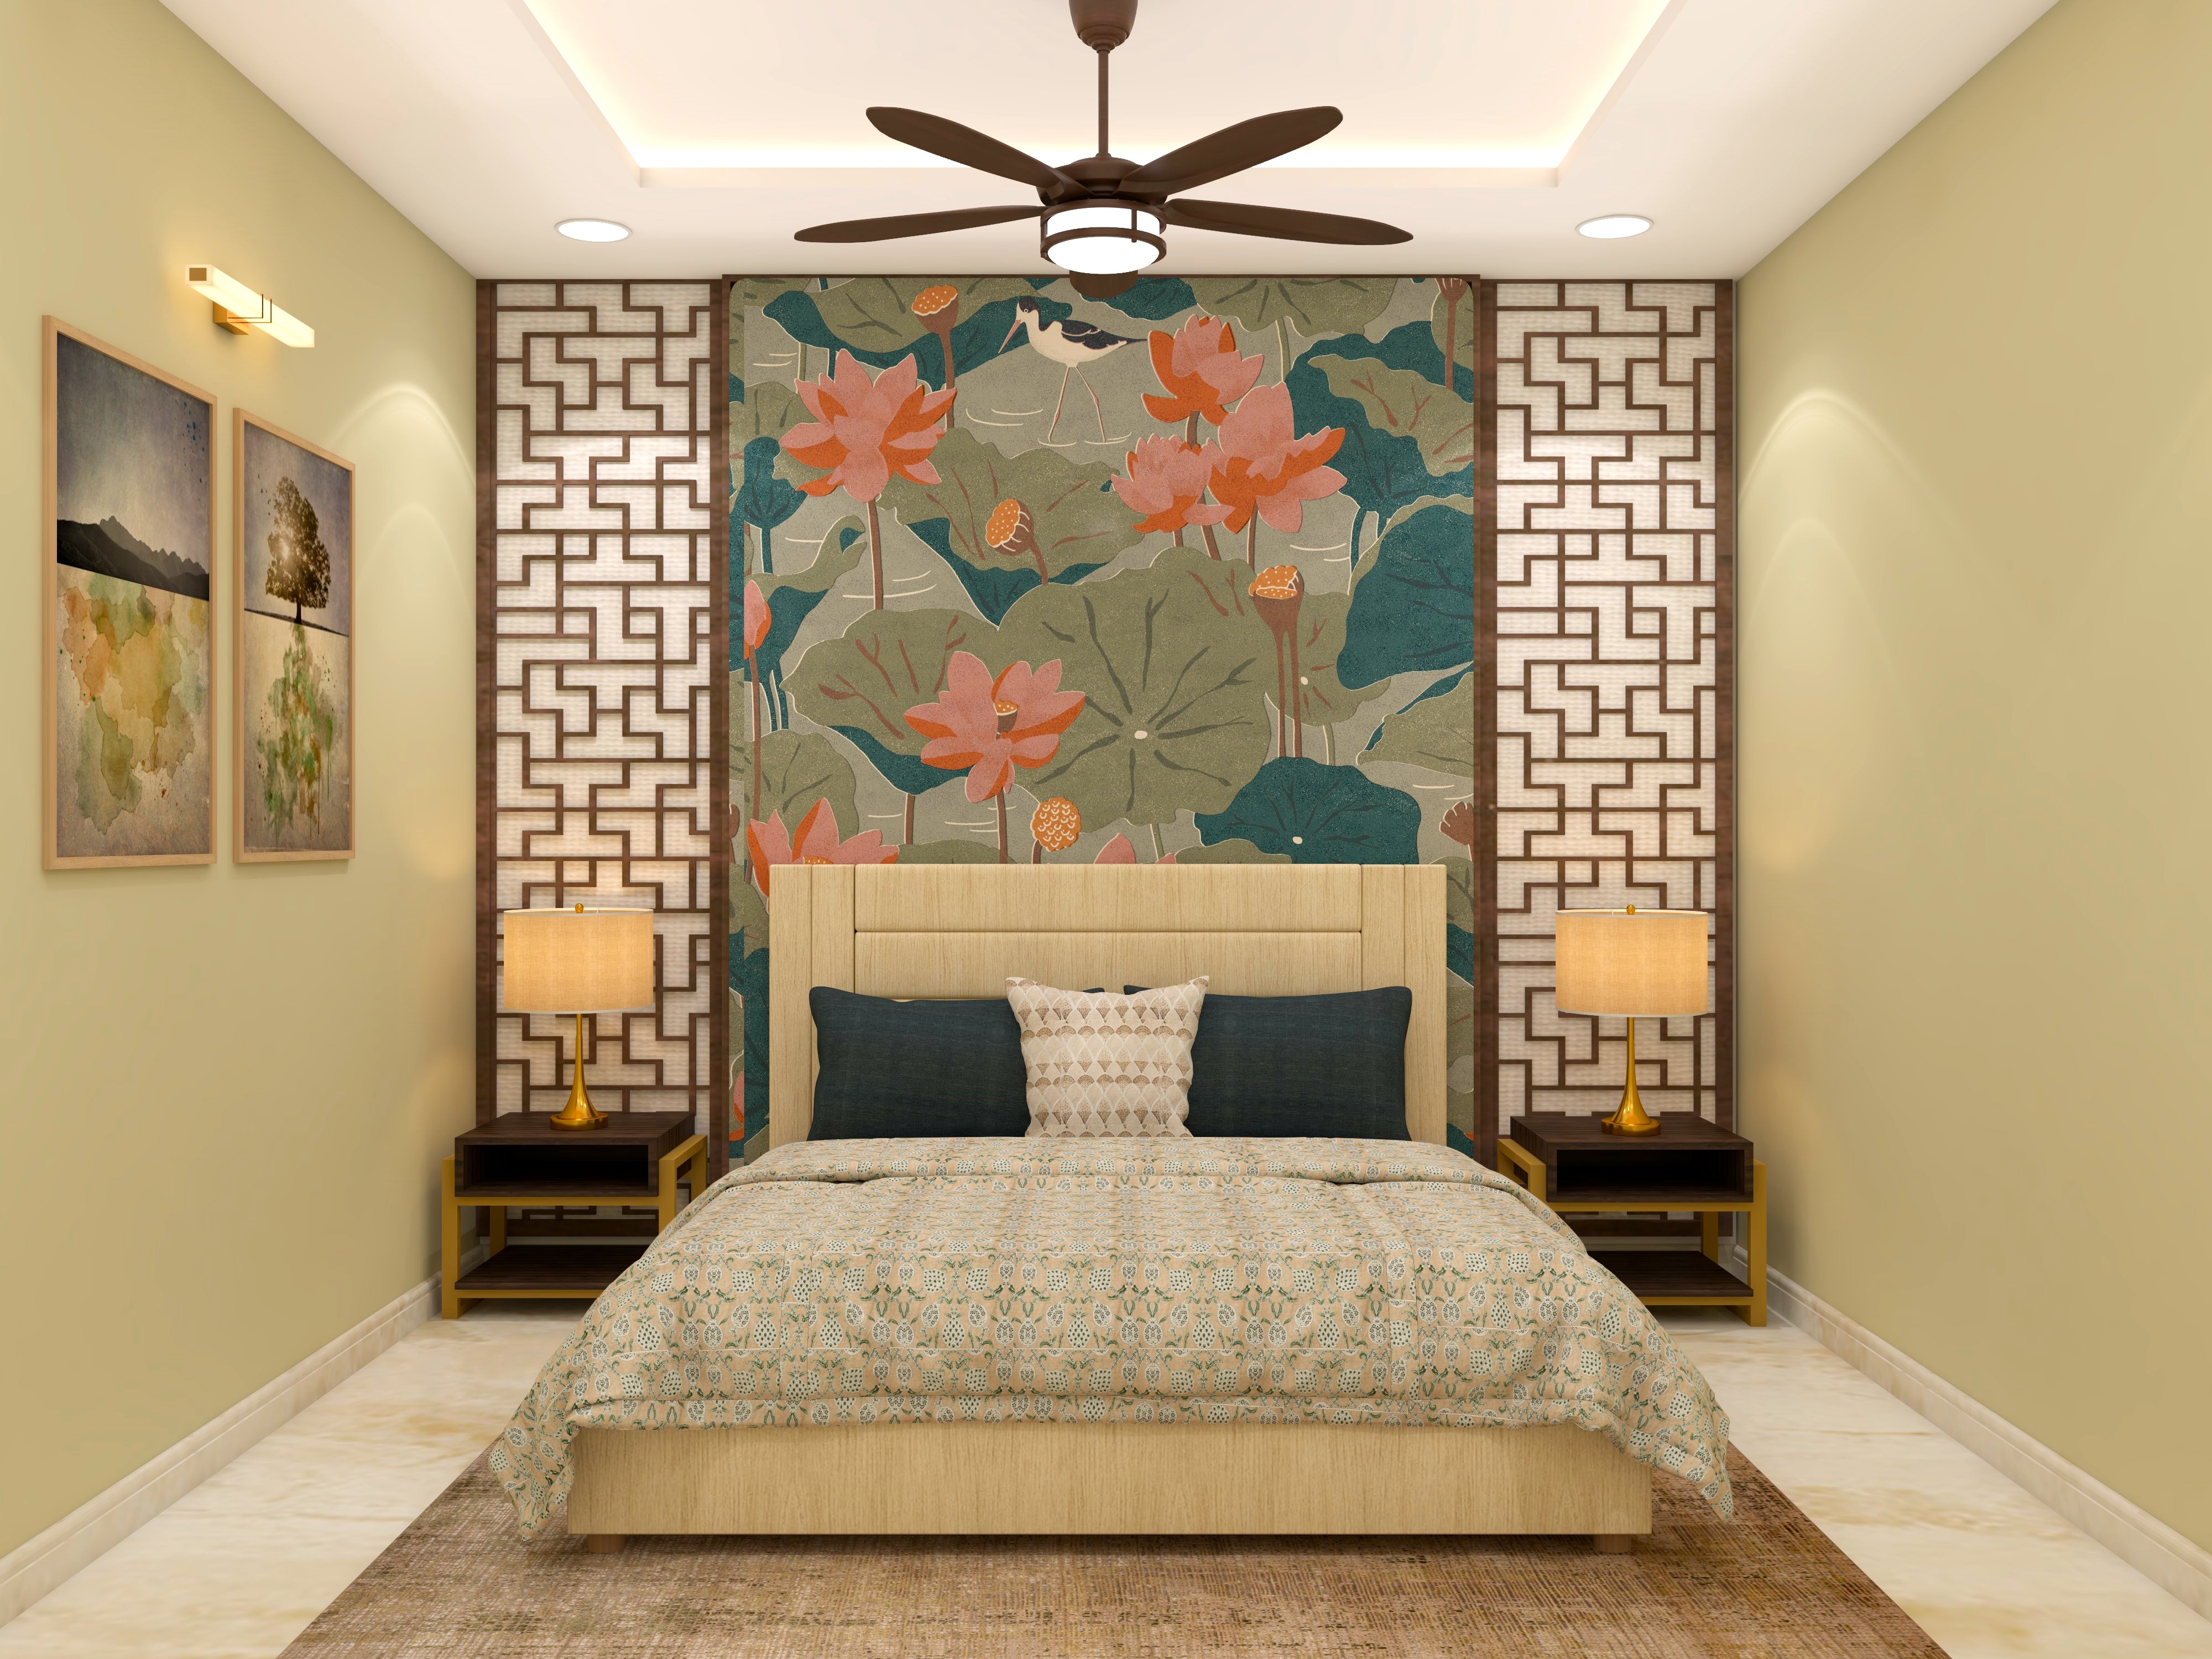 Guest room wall design with floral wallpaper and wooden panels-Beautiful Homes